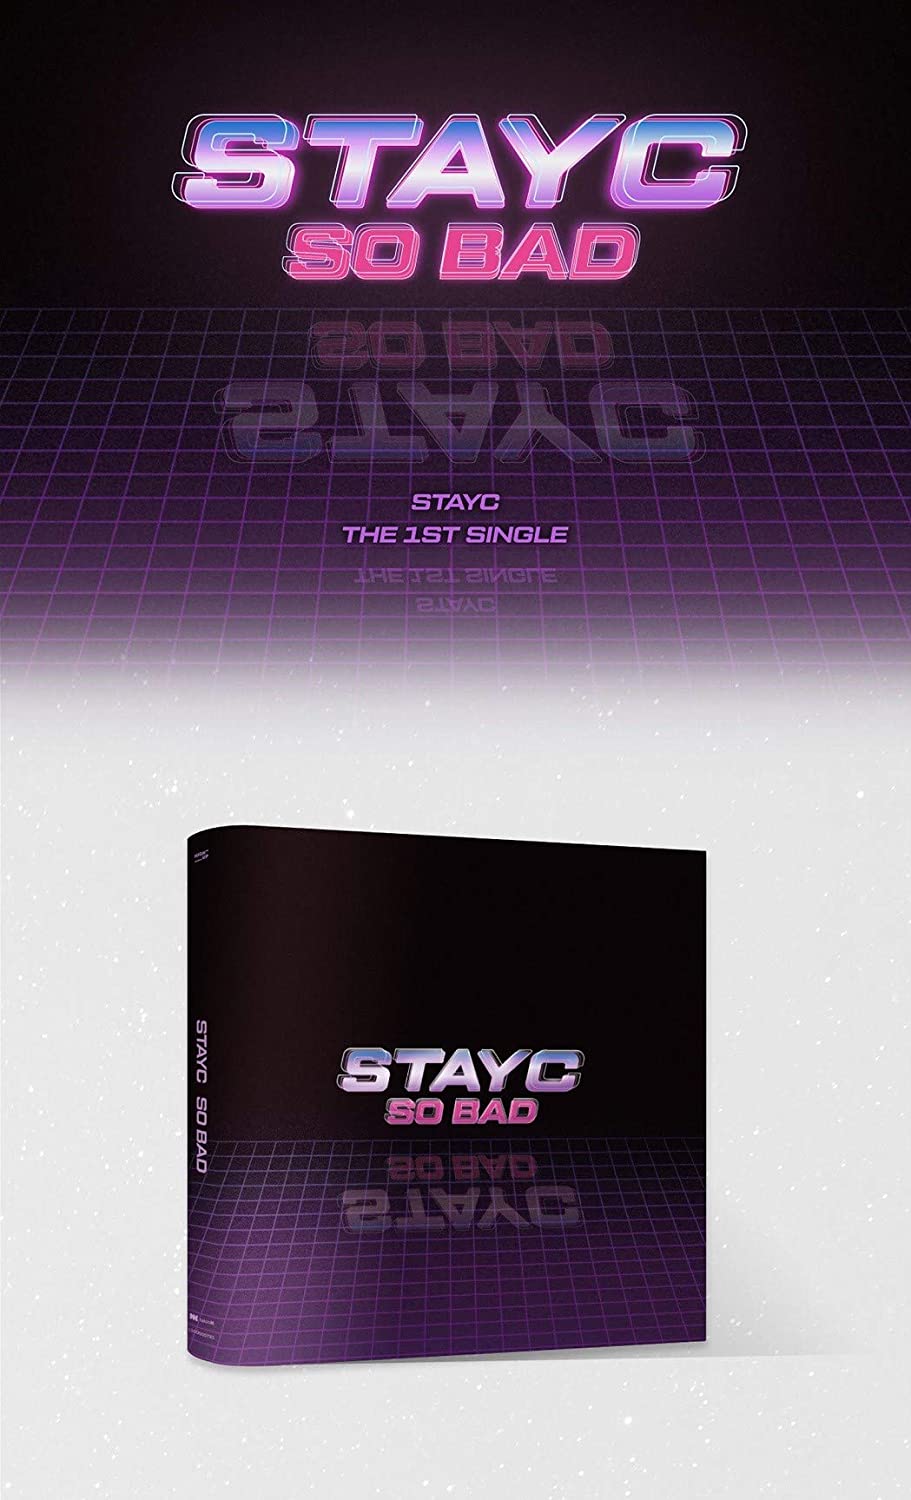 STAYC ALBUM [STAR TO A YOUNG CULTURE]